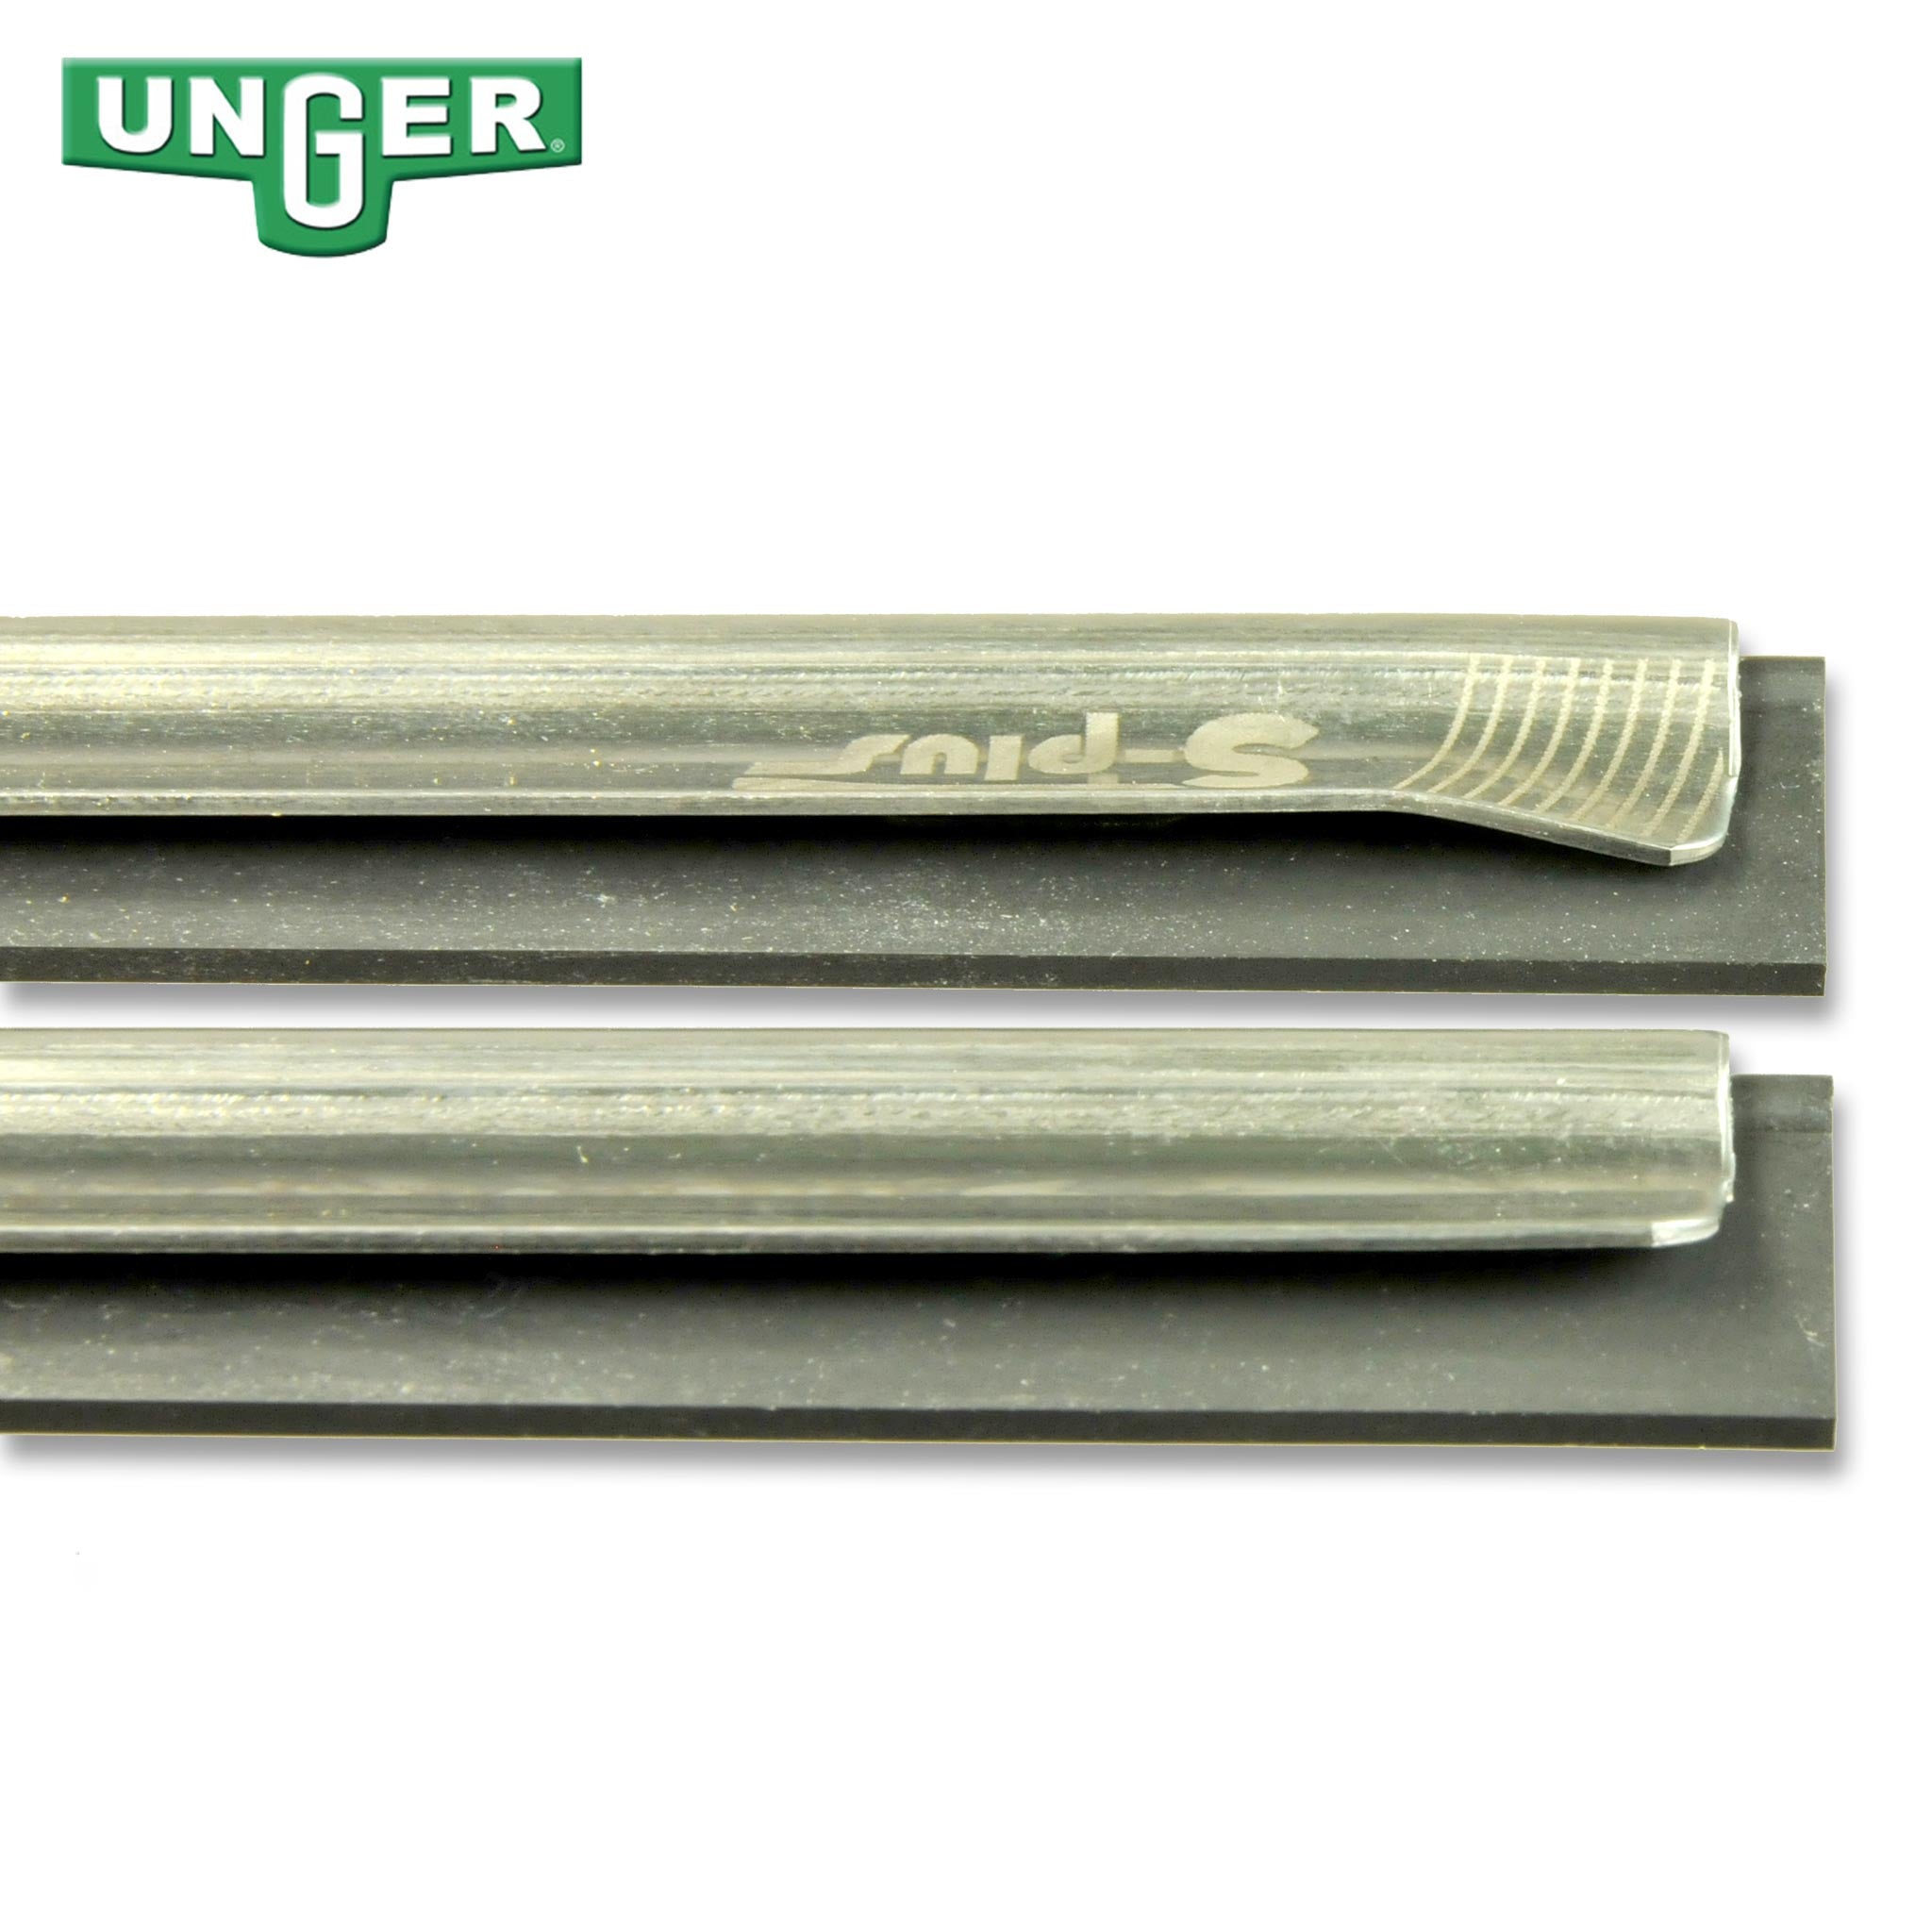 Unger S Plus Squeegee Channel